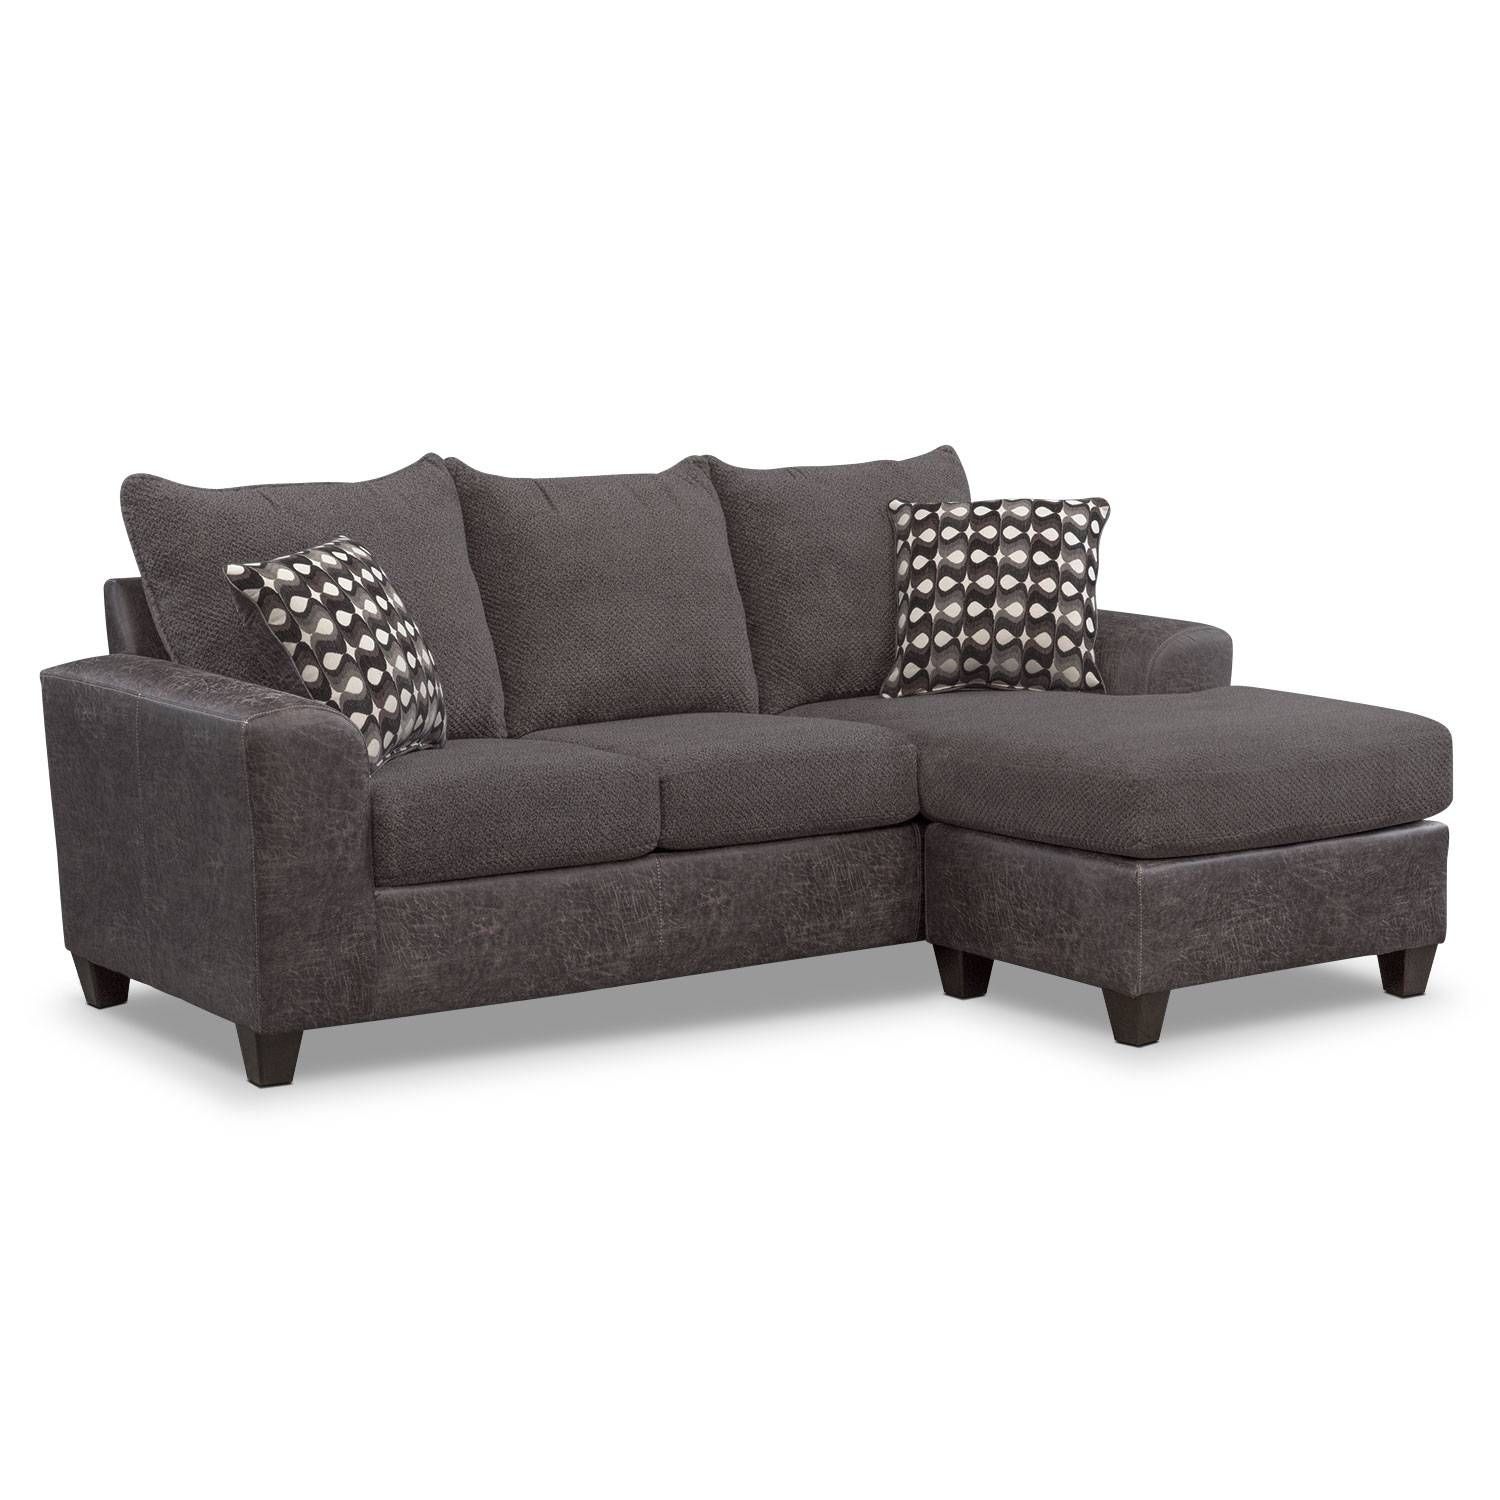 Sofas & Couches | Living Room Seating | Value City Furniture In Sofas With High Backs (View 8 of 30)